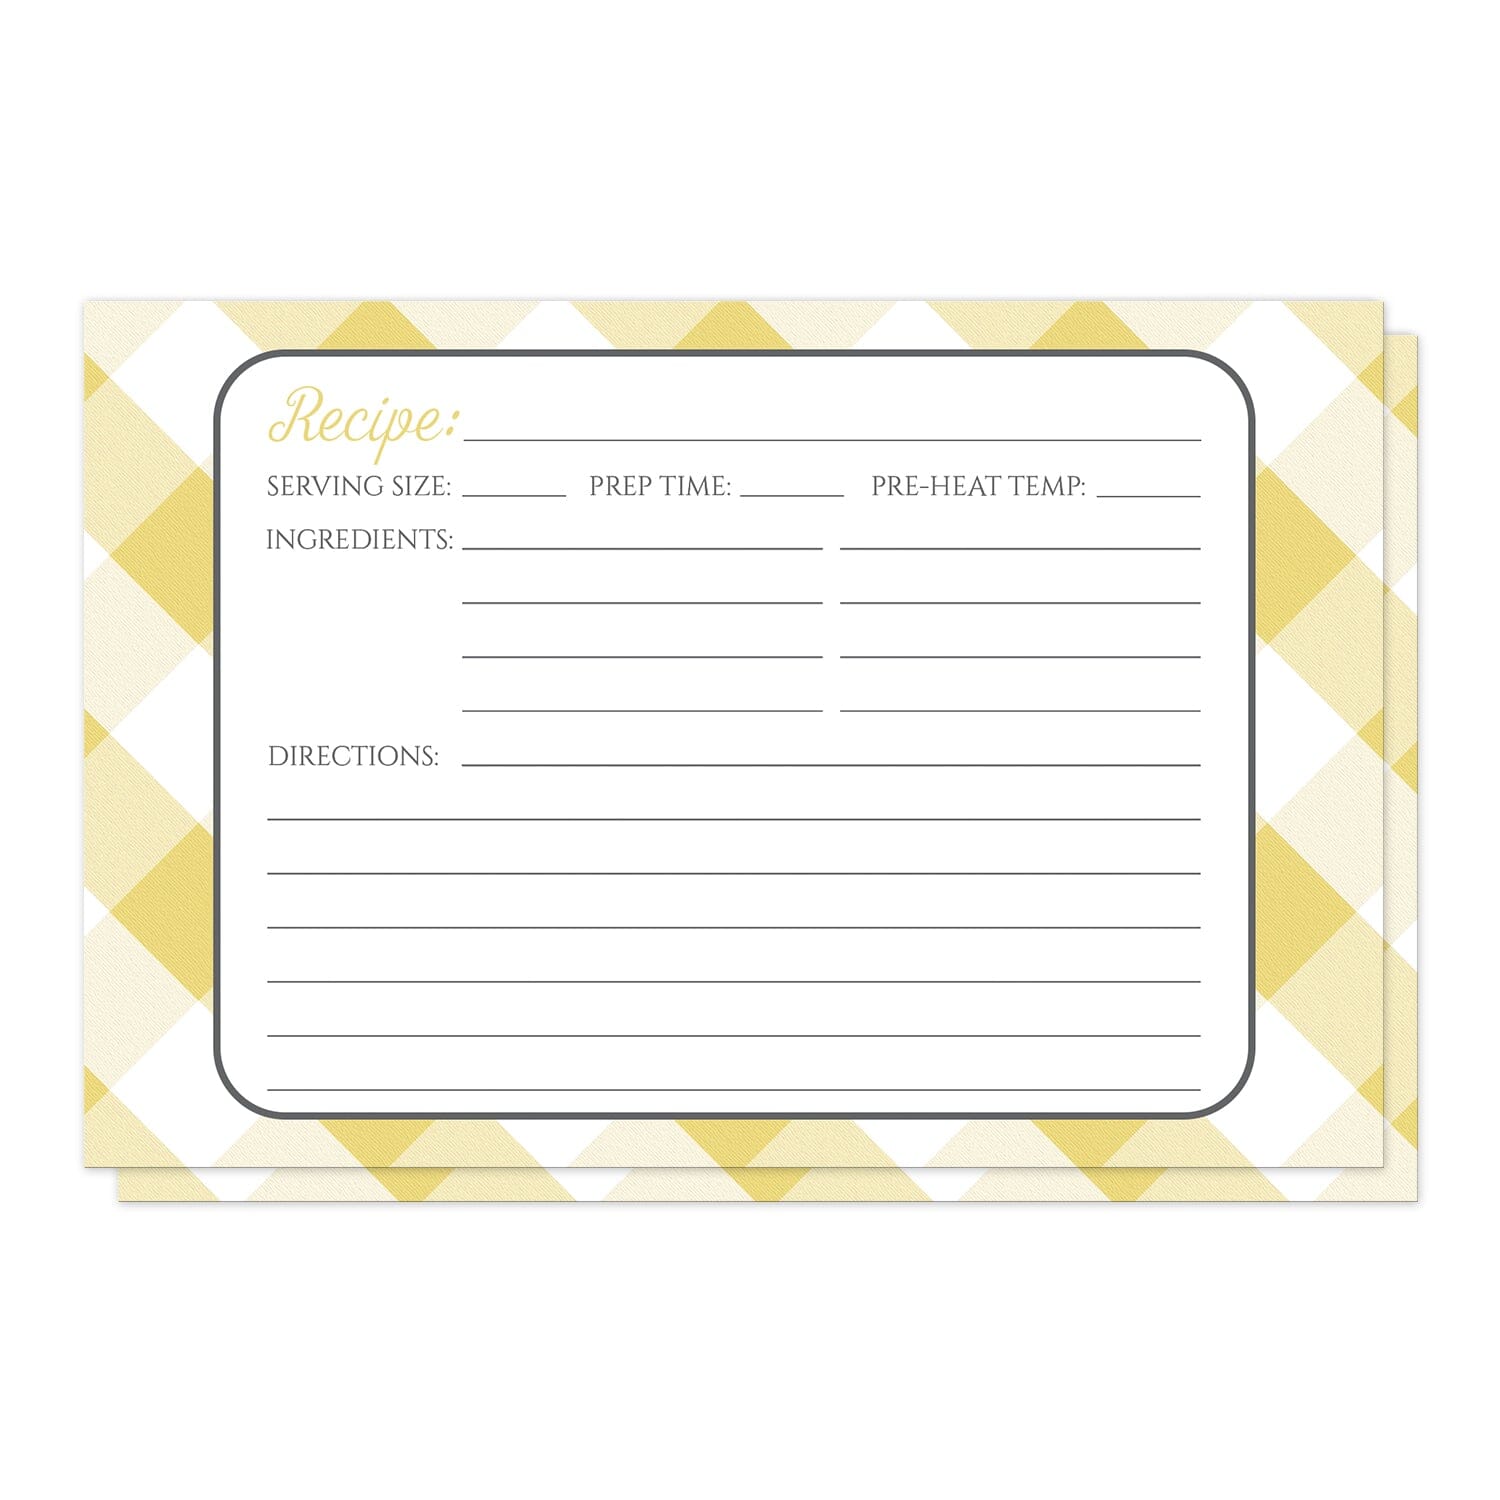 Yellow Gingham Recipe Cards at Artistically Invited. Yellow gingham recipe cards designed with a diagonal white and yellow gingham pattern background. The recipe is to be handwritten over a white rectangular area outlined in gray centered over the yellow gingham background.